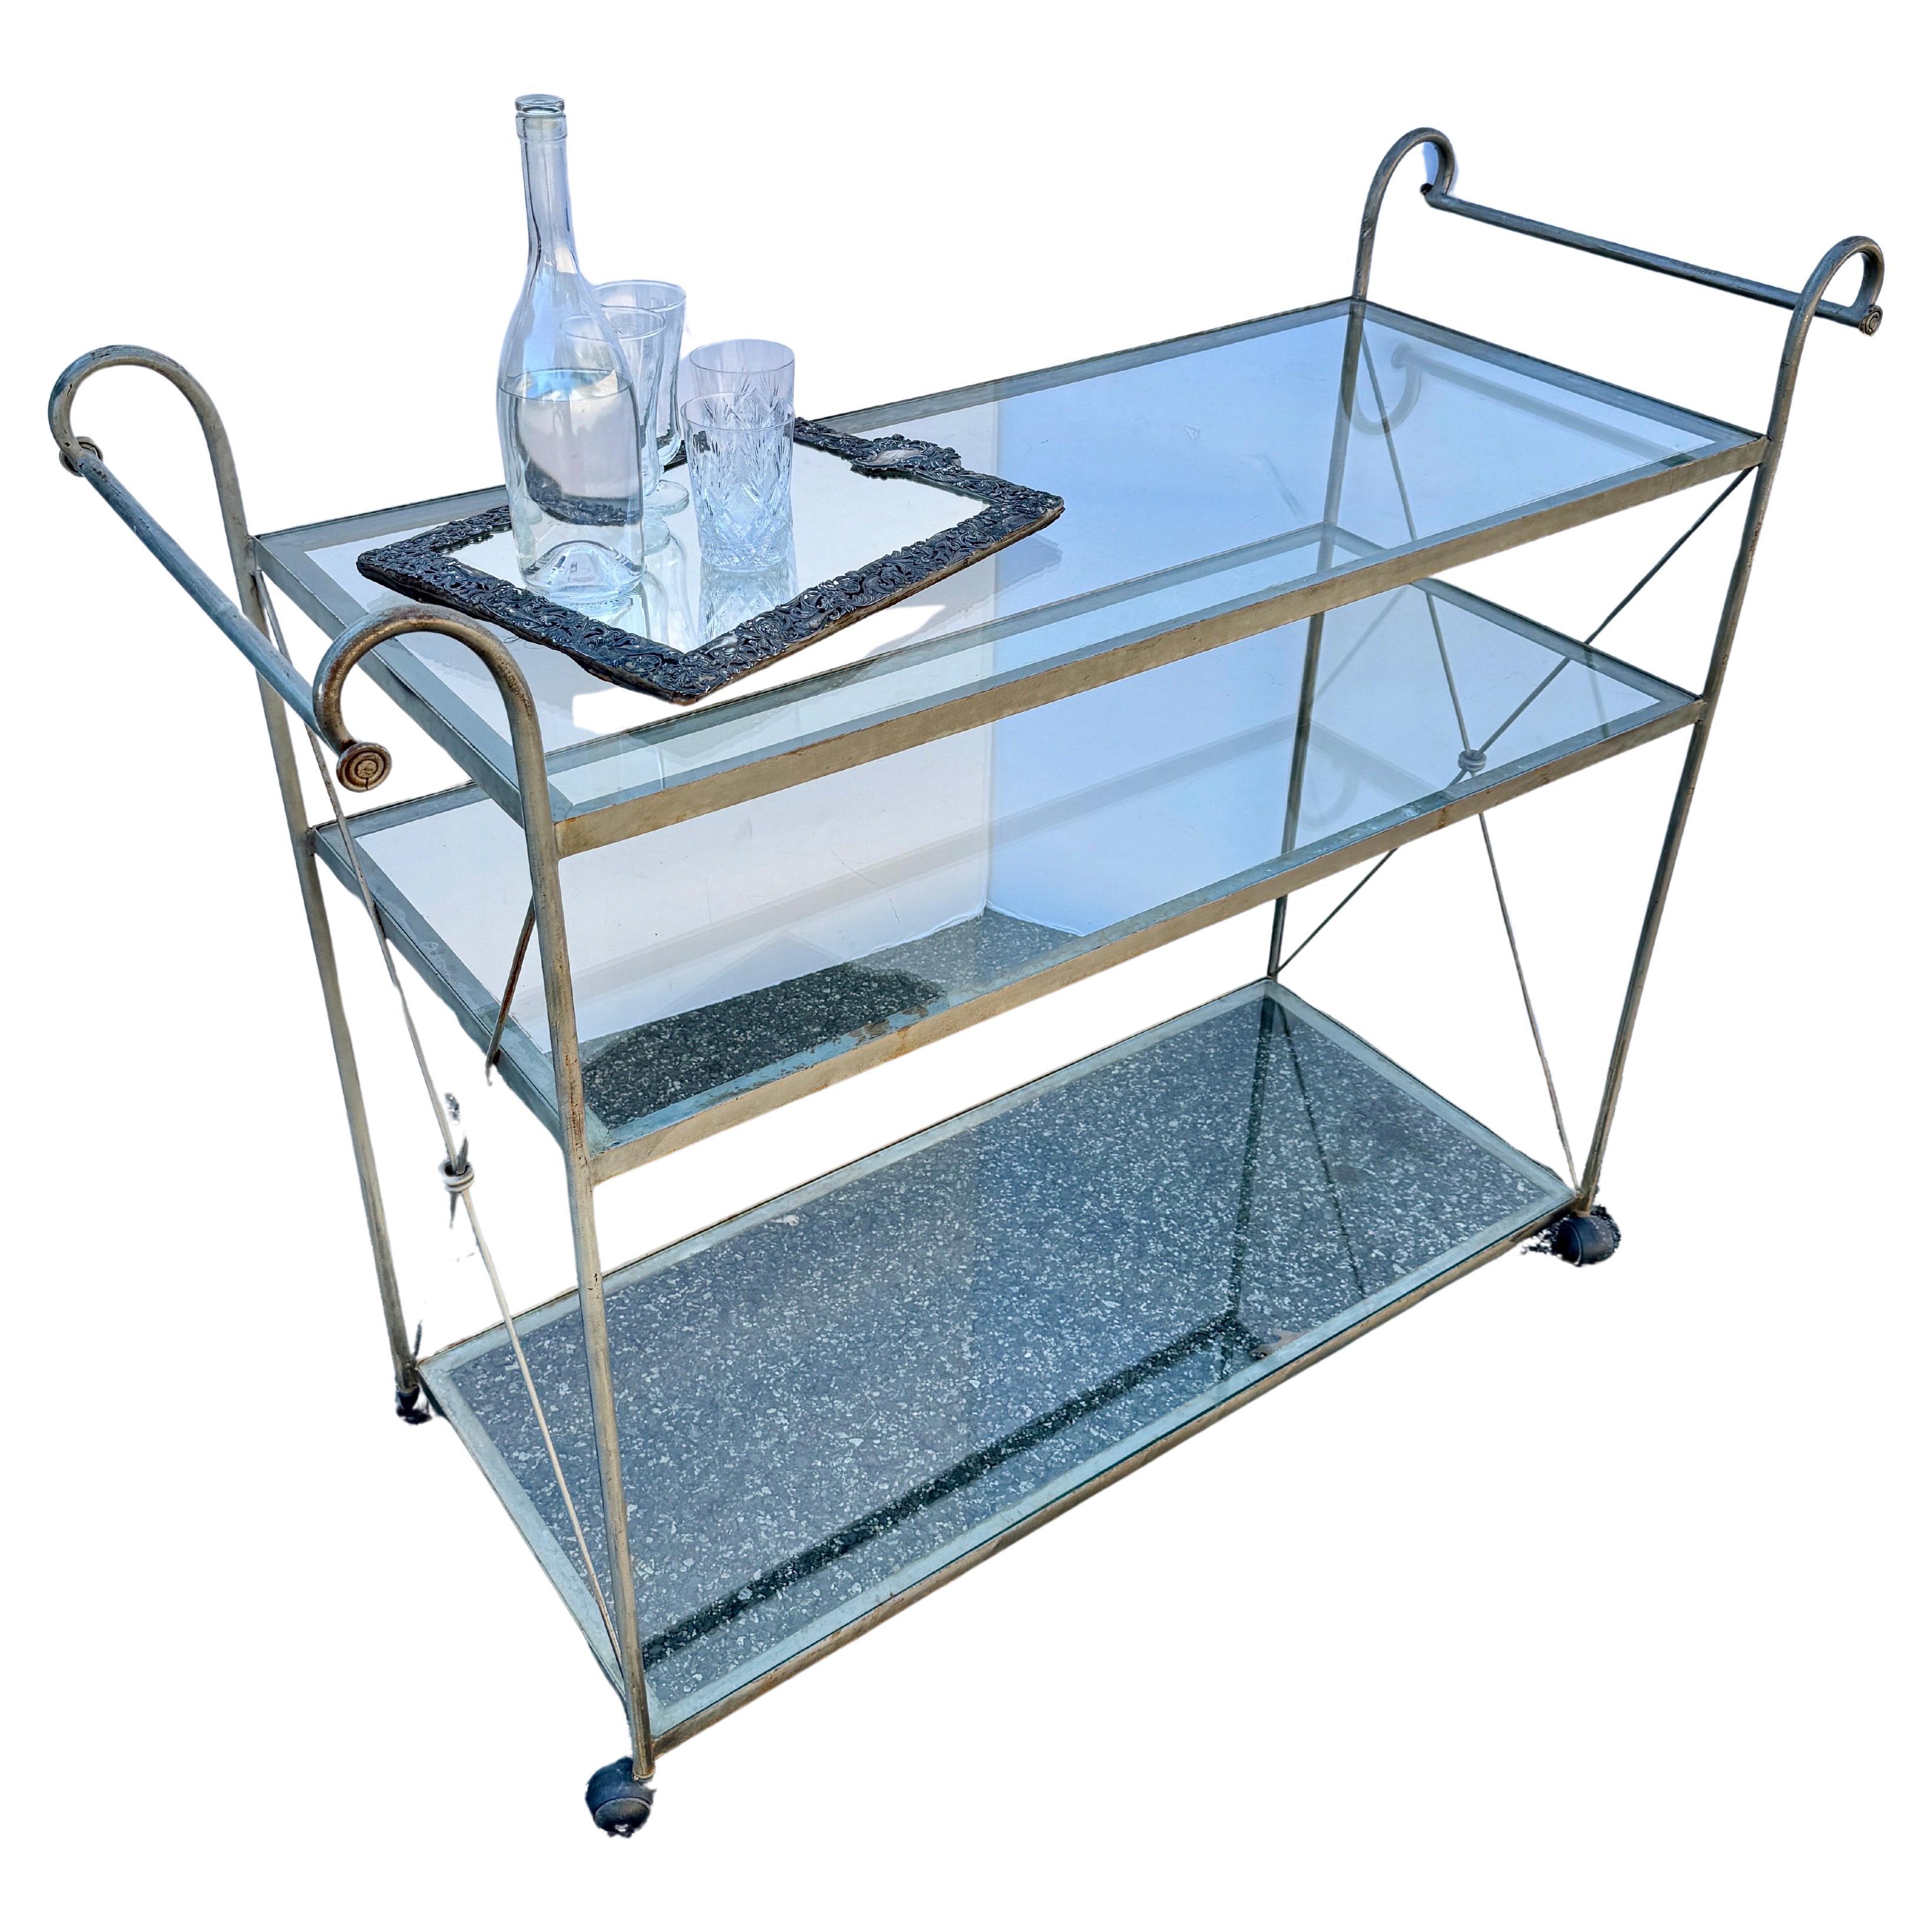 Estate Scale Three Tier Trolley as a Serving Bar Cart Etagere, France circa 1960's

This large vintage double handled cart with three glass shelves set upon casters offer generous space for everything from cocktails or serving dinner to guests.